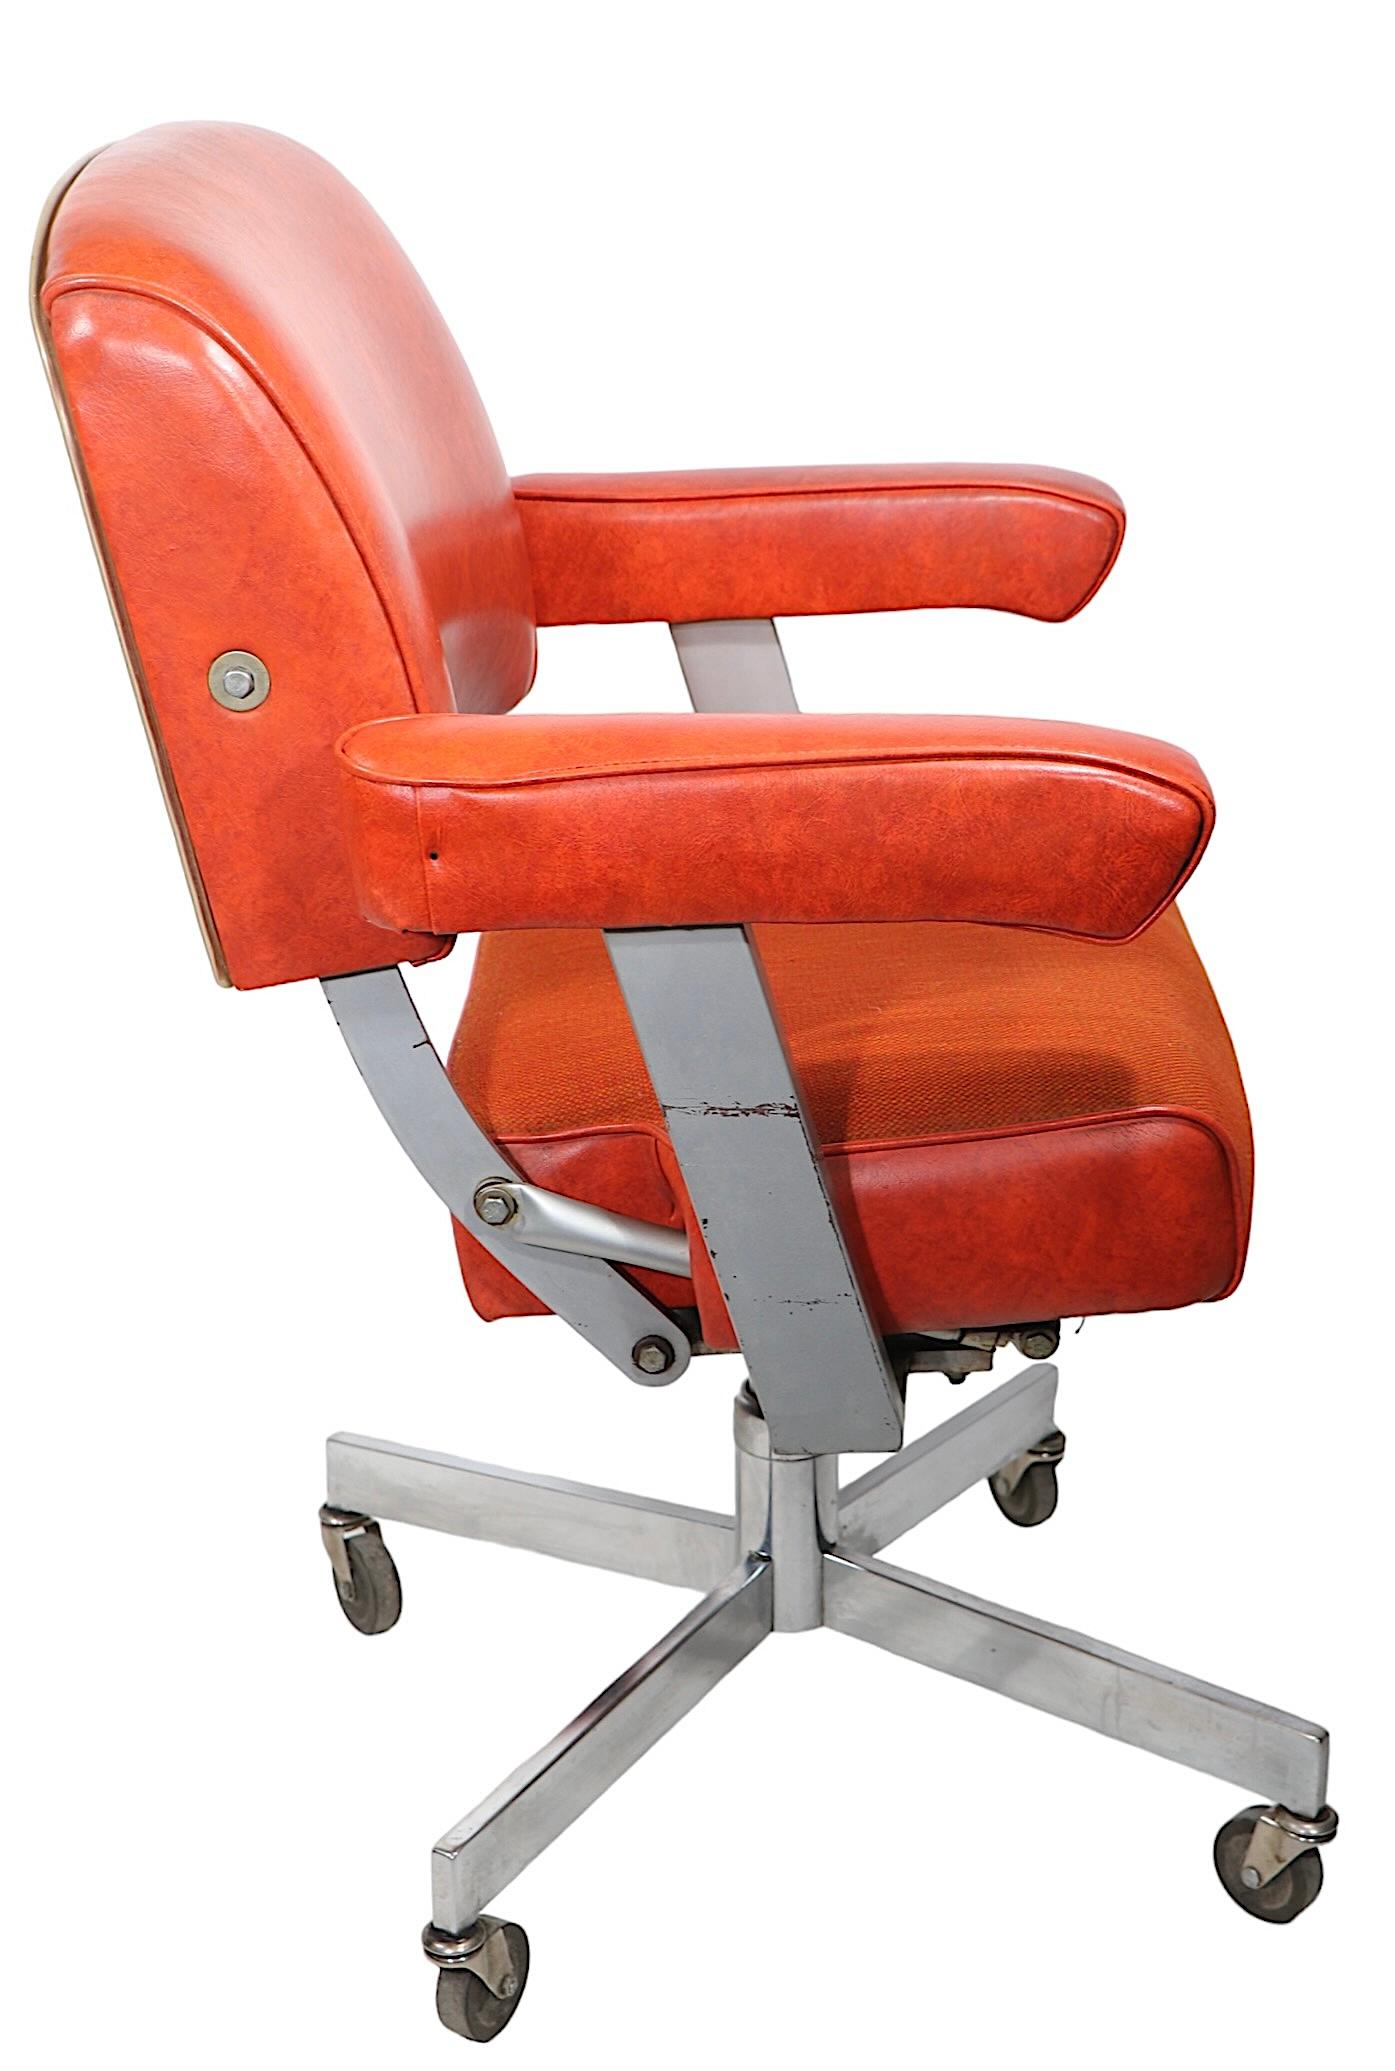 Executive Model DoMore Swivel Desk Office Chair Model 616 c 1950/1960's  For Sale 4